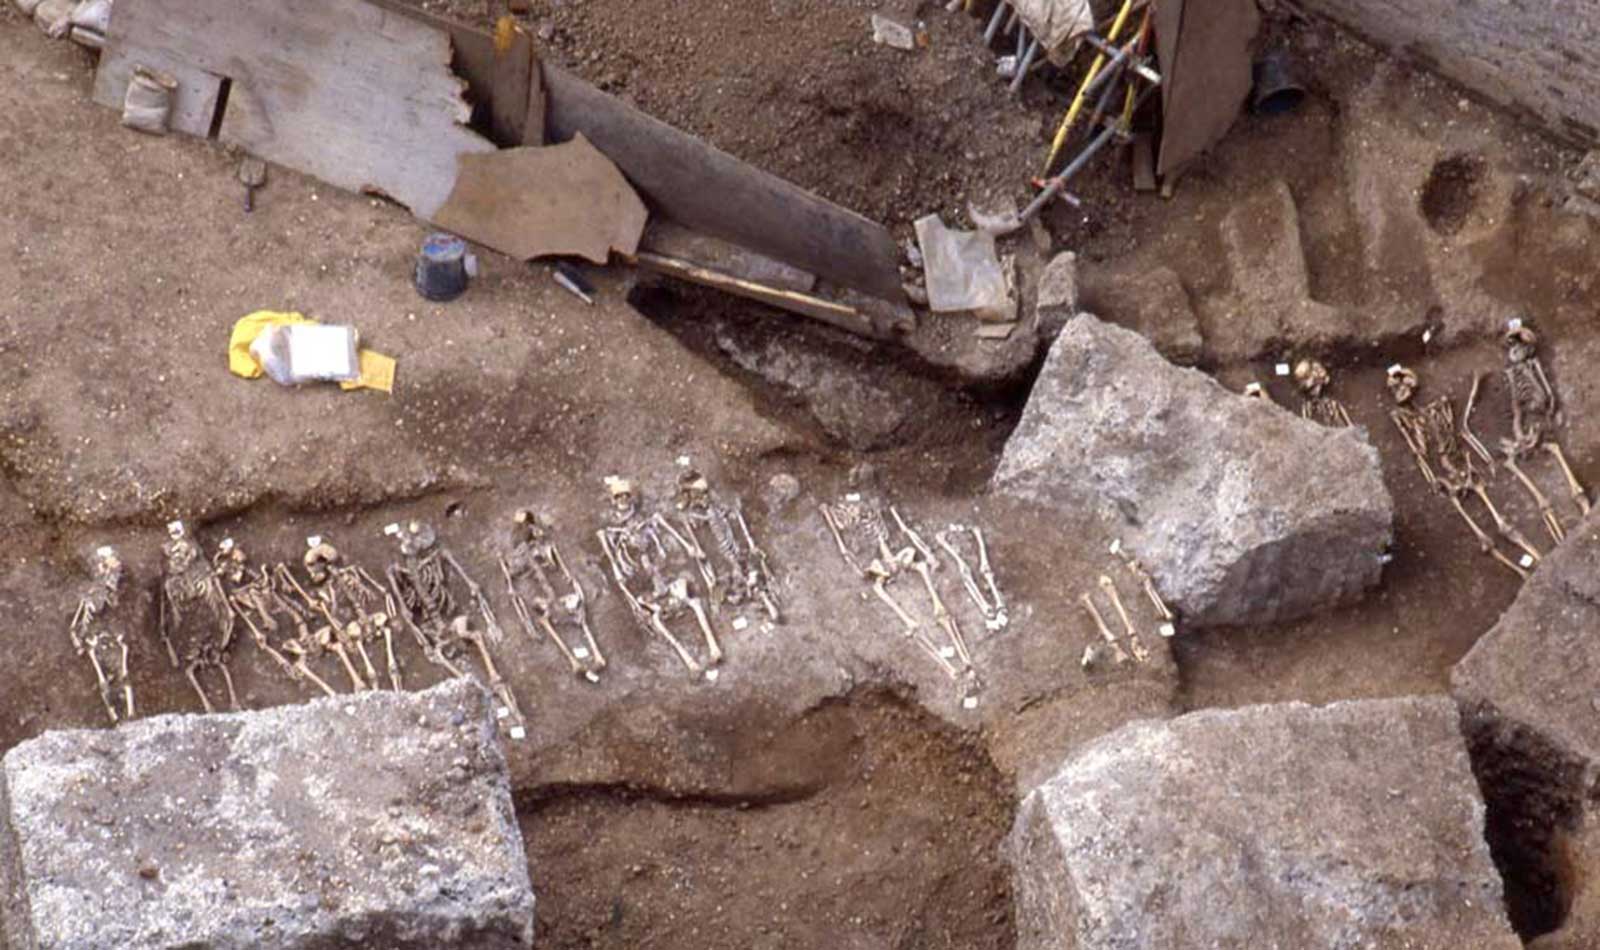 East Smithfield Black Death burial ground, excavation of one of the mass graves site, 1980s.